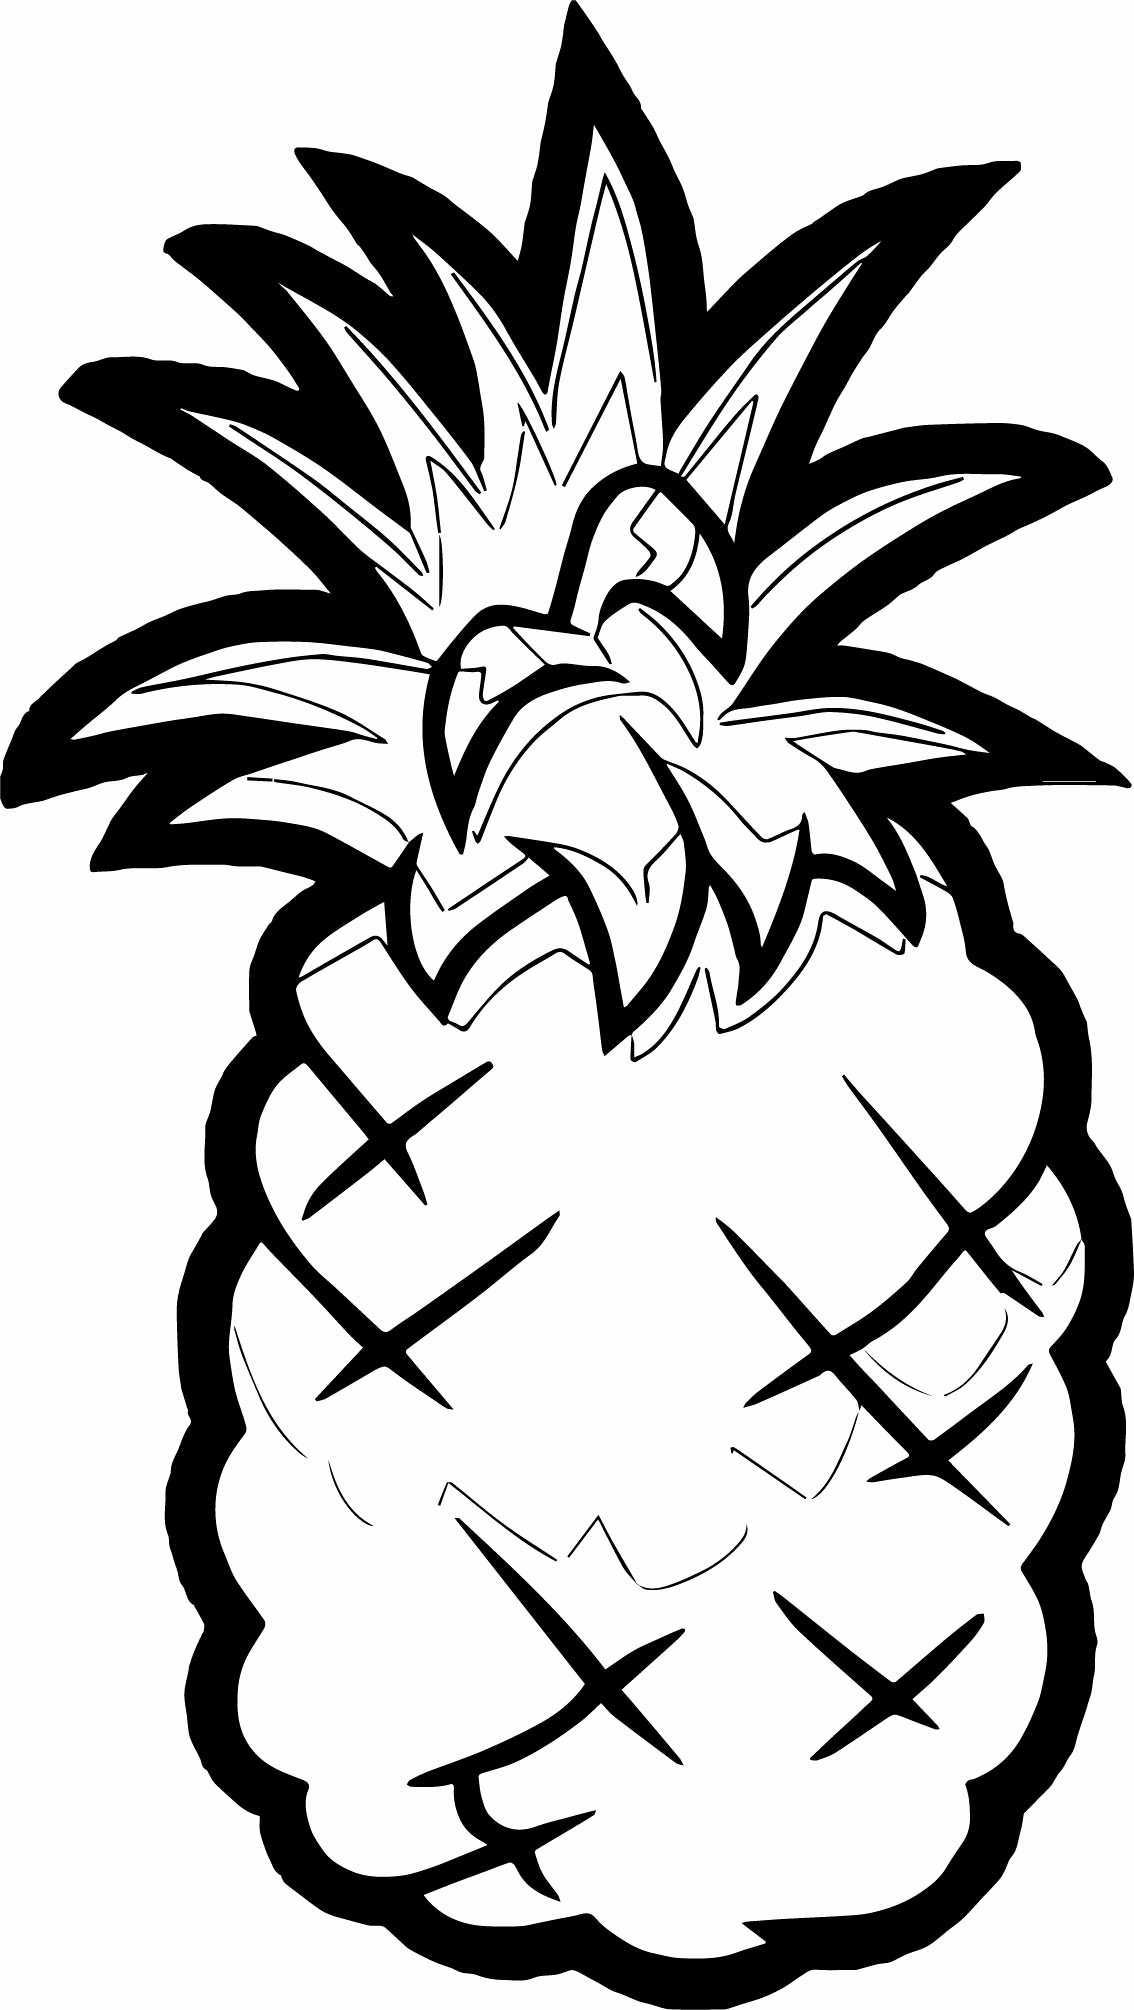 Pineapple Template Printable Elegant Pineapple Coloring Page Fruit Fruits Pages Grig3